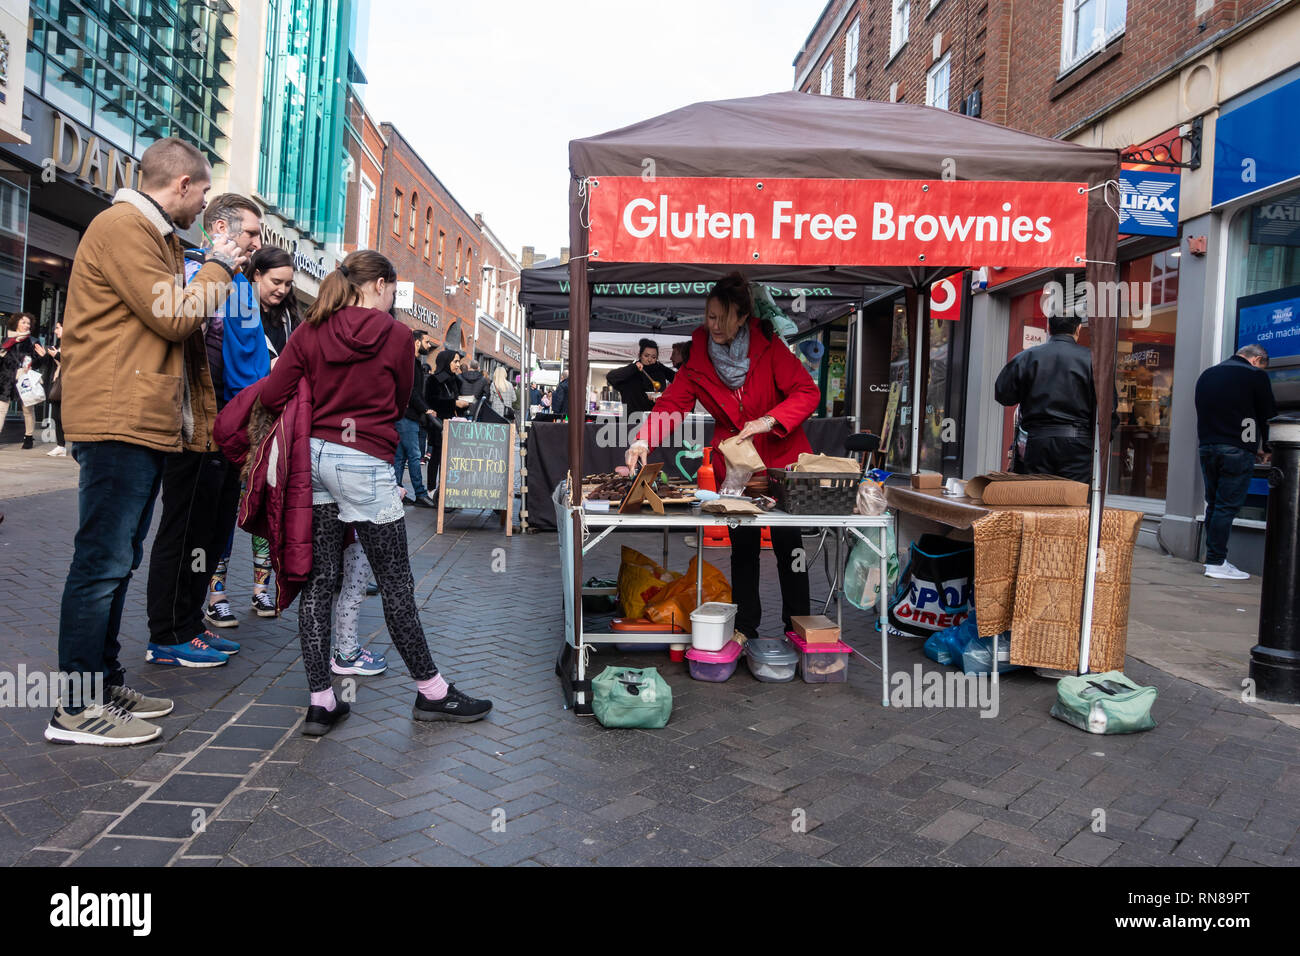 A stall selling gluten free brownies at a street market in Peascod Street in Windsor, Berkshire, UK Stock Photo